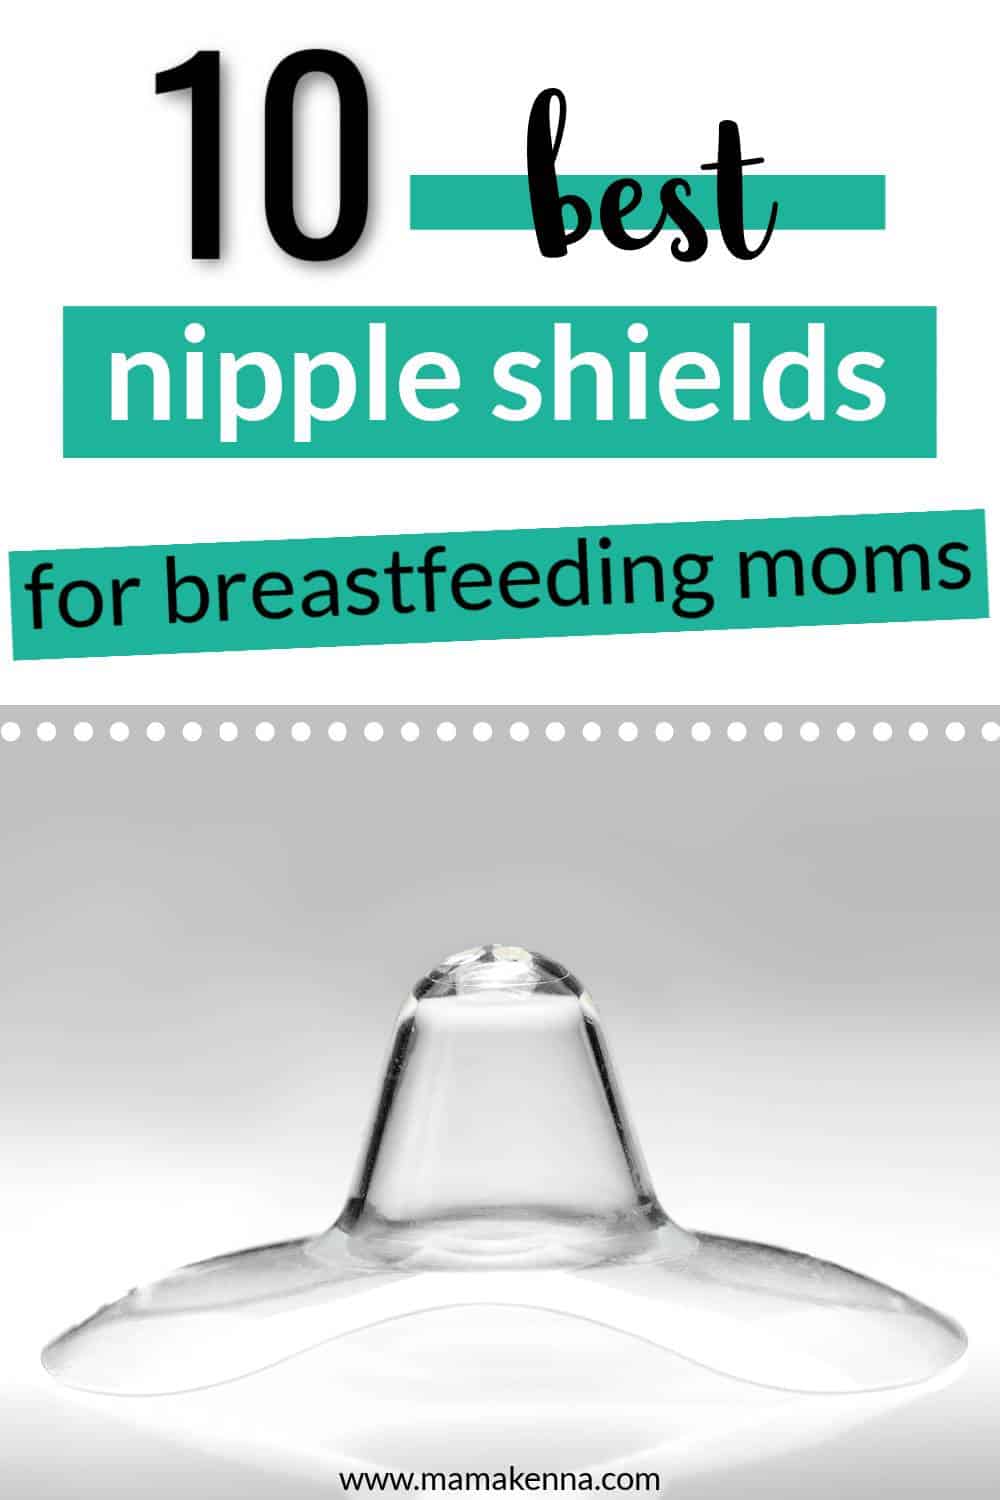 find the best nipple shields for breastfeeding moms here